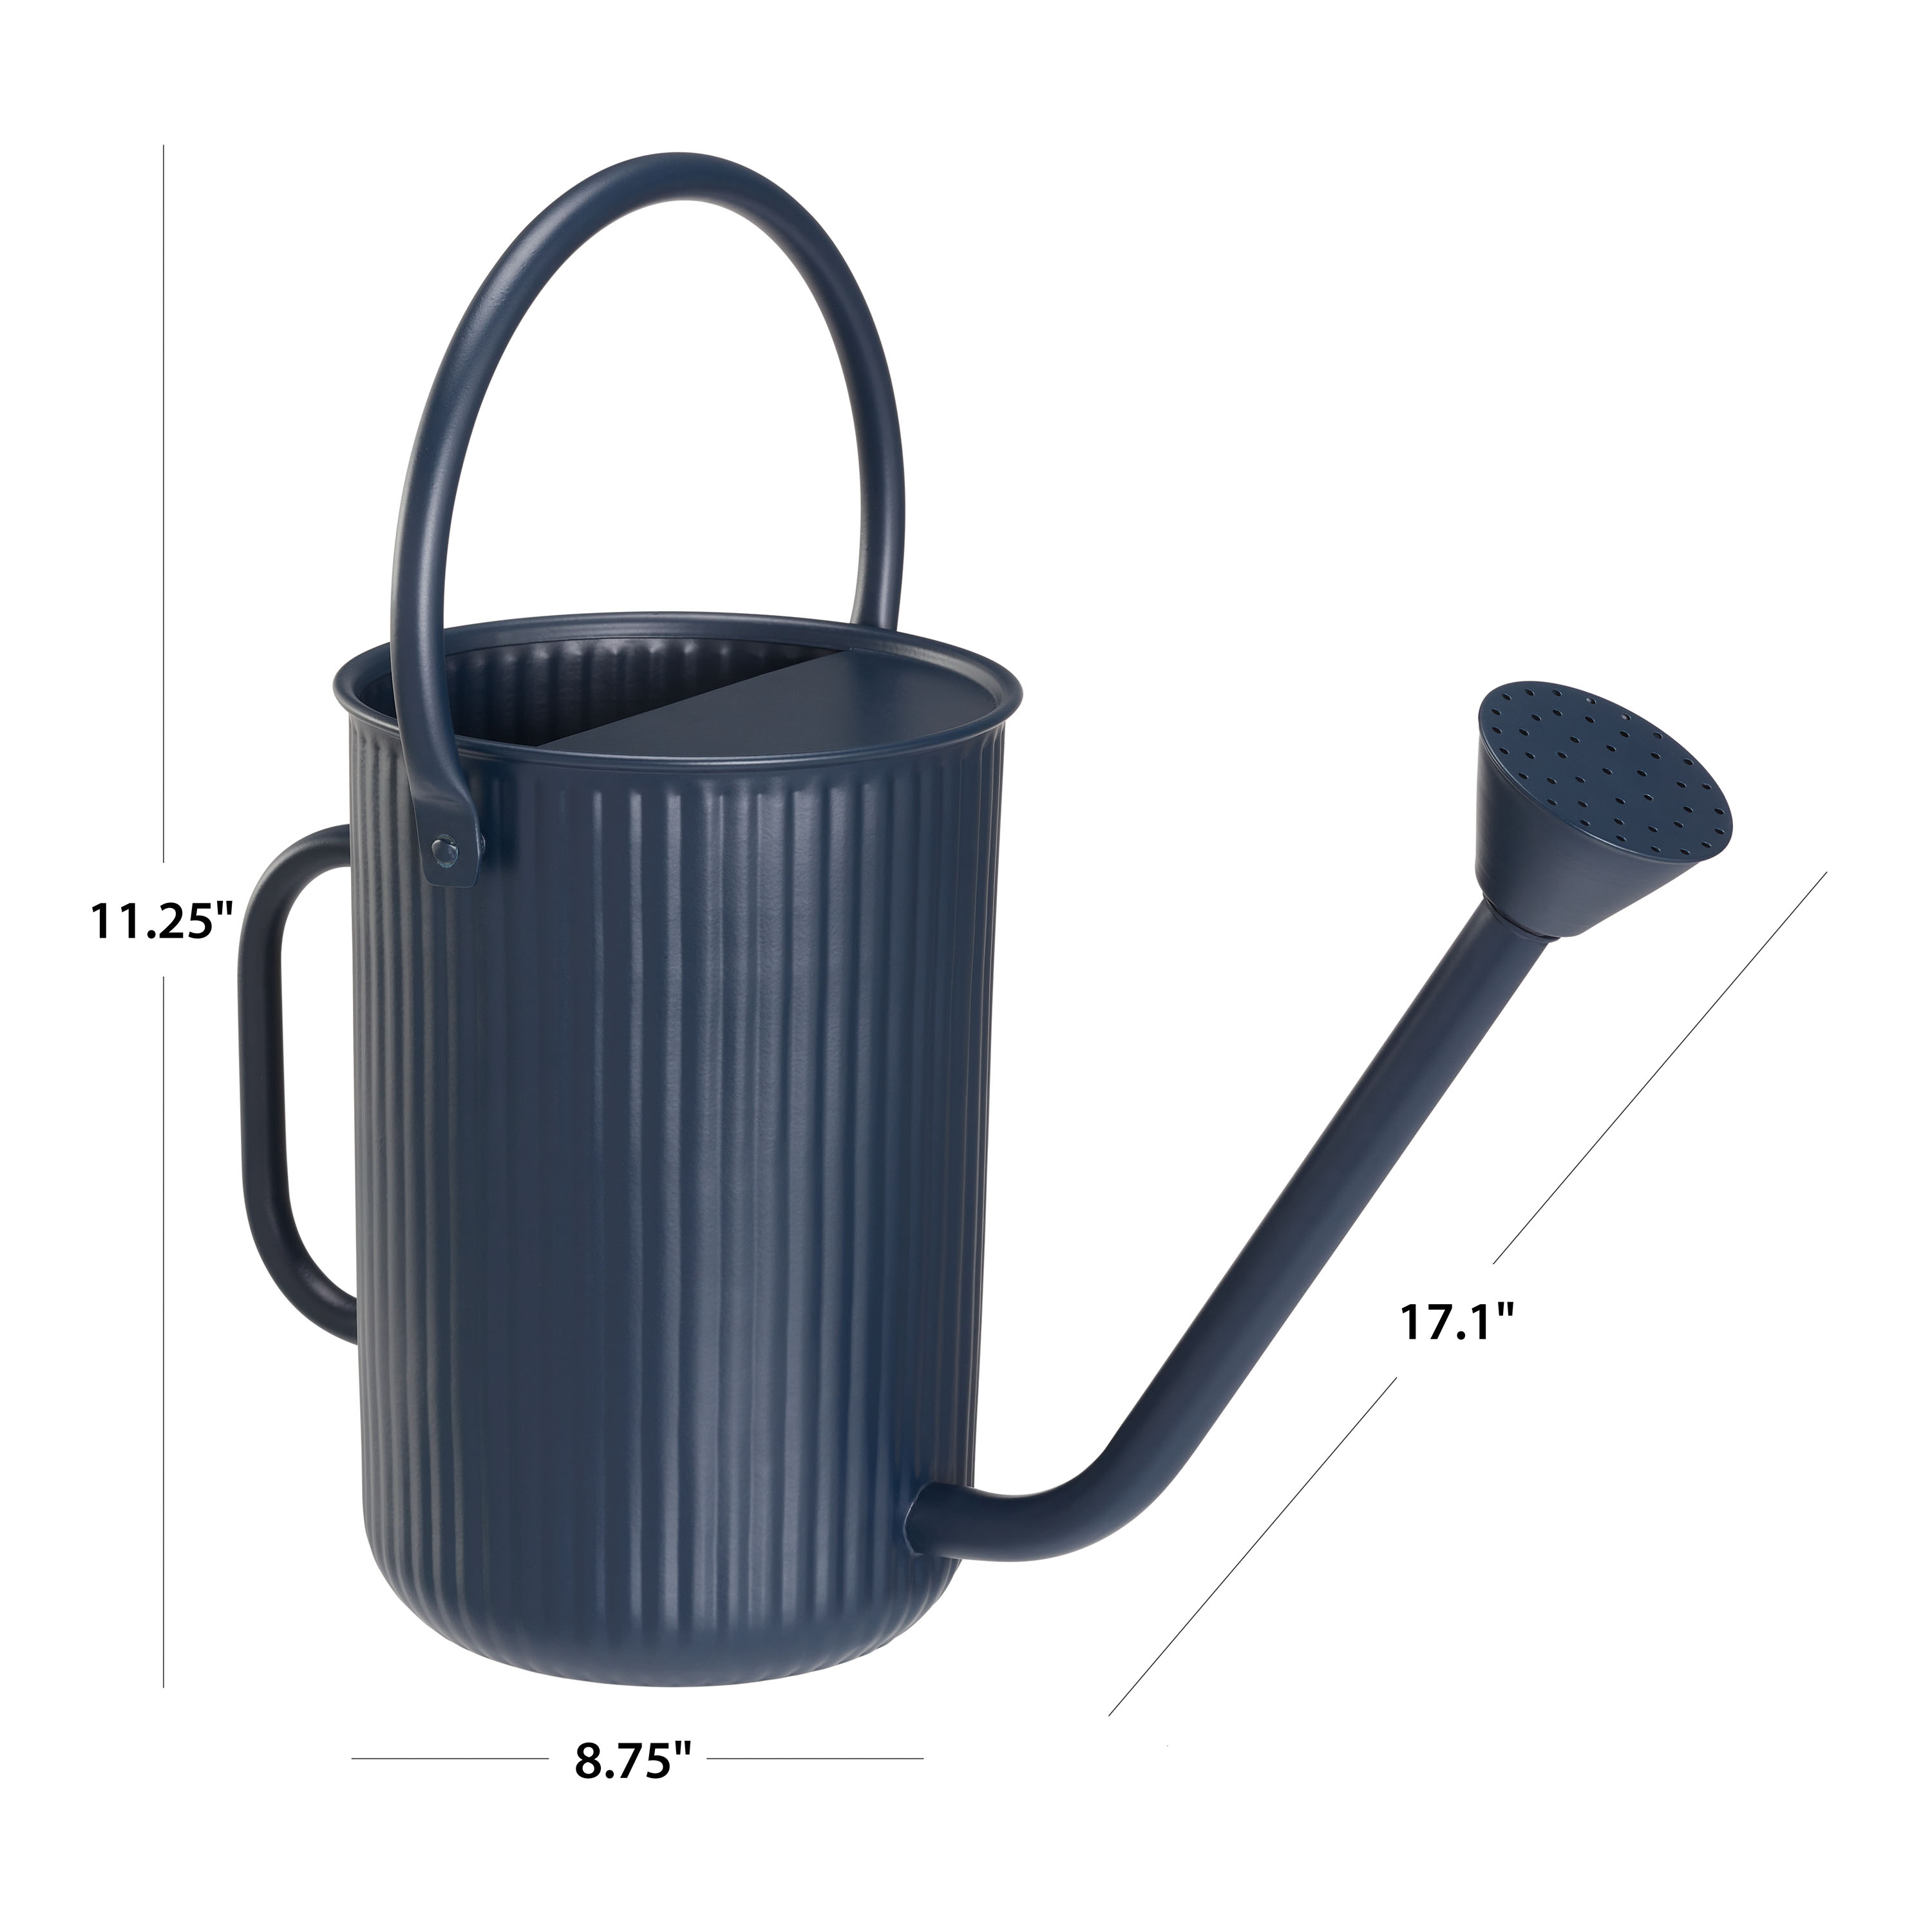 Better Homes & Gardens 1.2 gal Steel Watering Can, Blue Cove - image 5 of 5